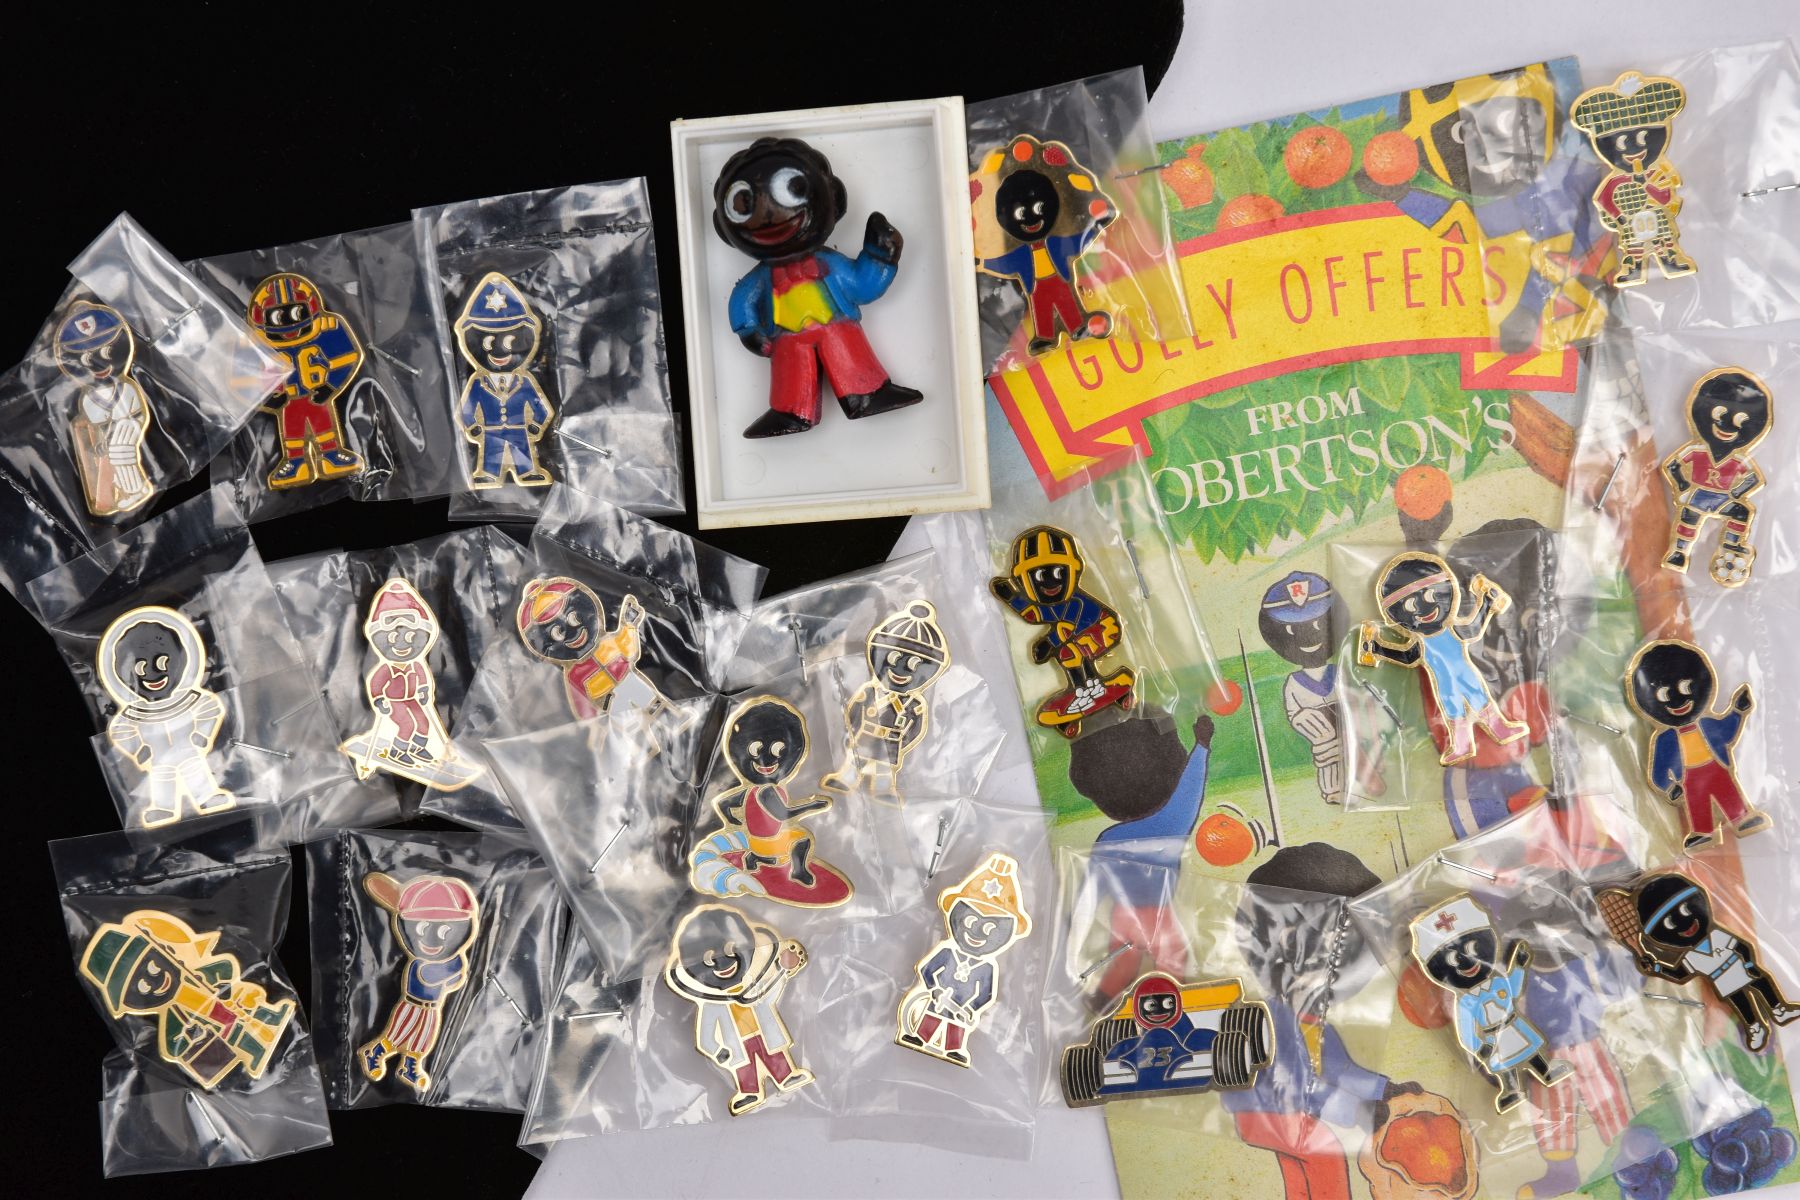 A FULL SET OF ROBERTSONS BROOCHES, AND A SMALL FIGURINE, to include a full set of twenty-one